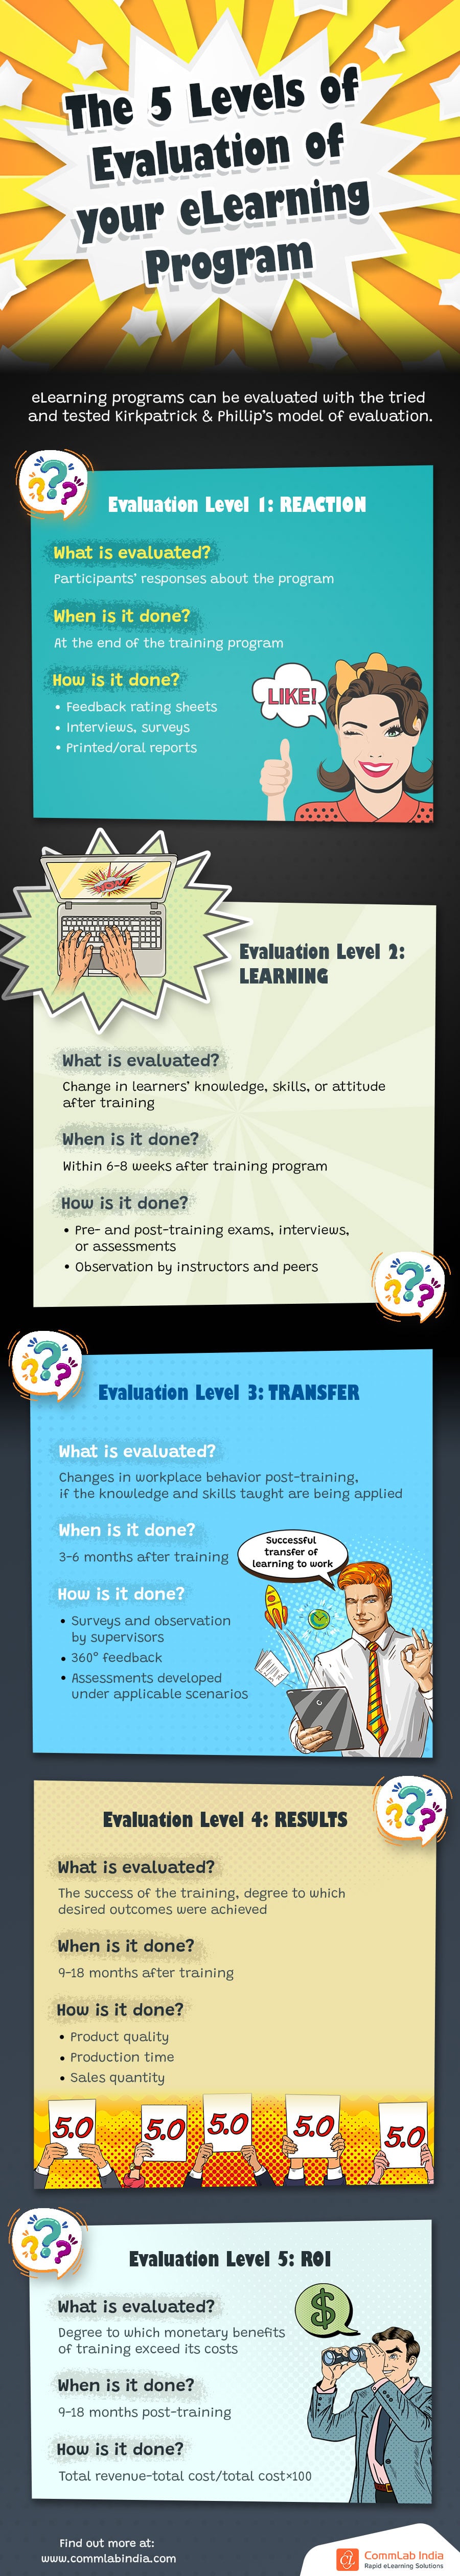 Evaluating eLearning at 5 Levels: What You Need to Know